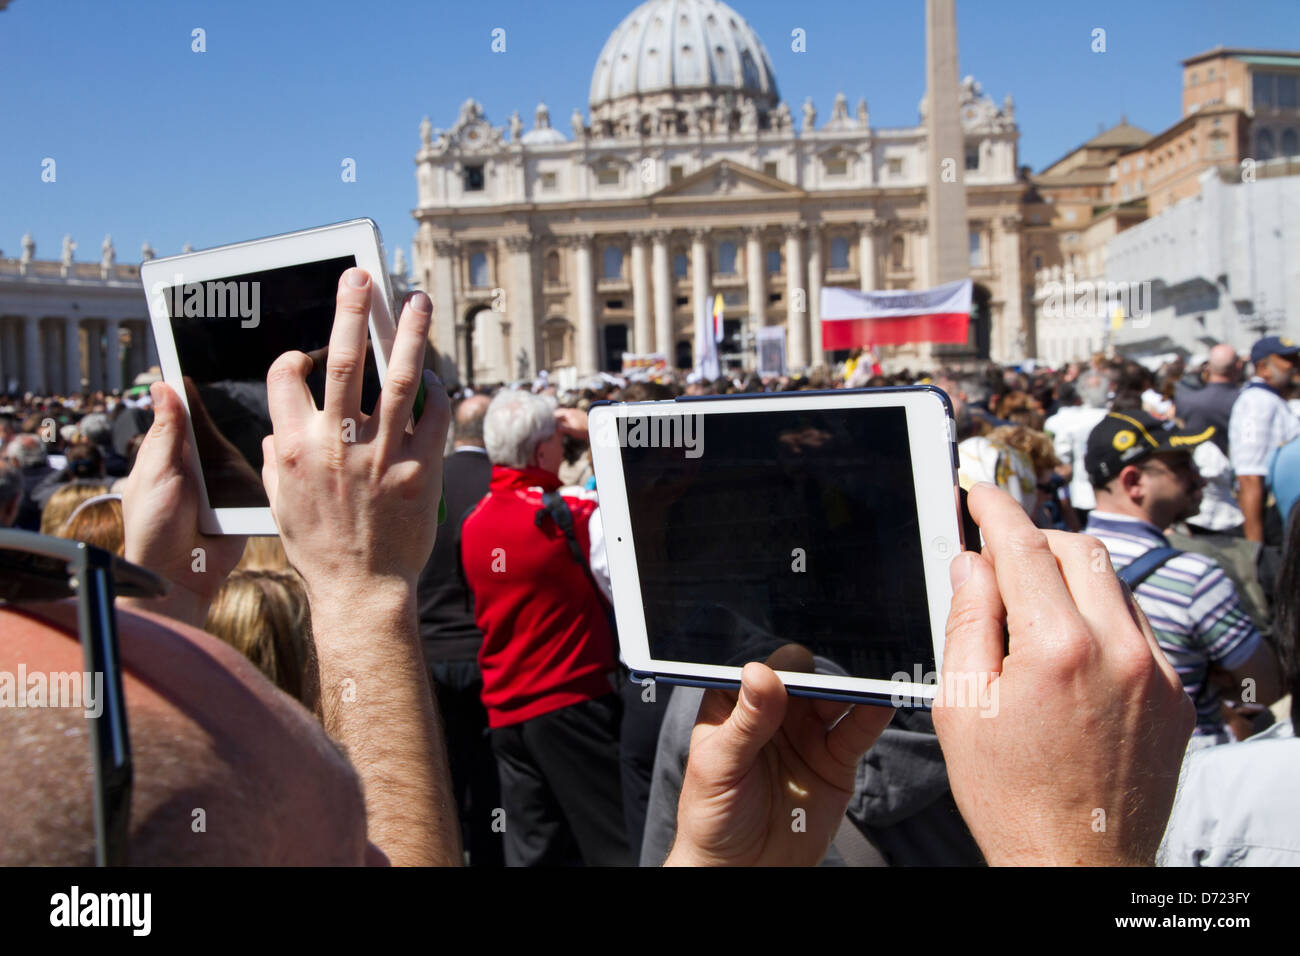 Taking photos video tablet computer Rome Italy pilgrims waiting for Pope Francisco Crowds in St Peter s Square Stock Photo